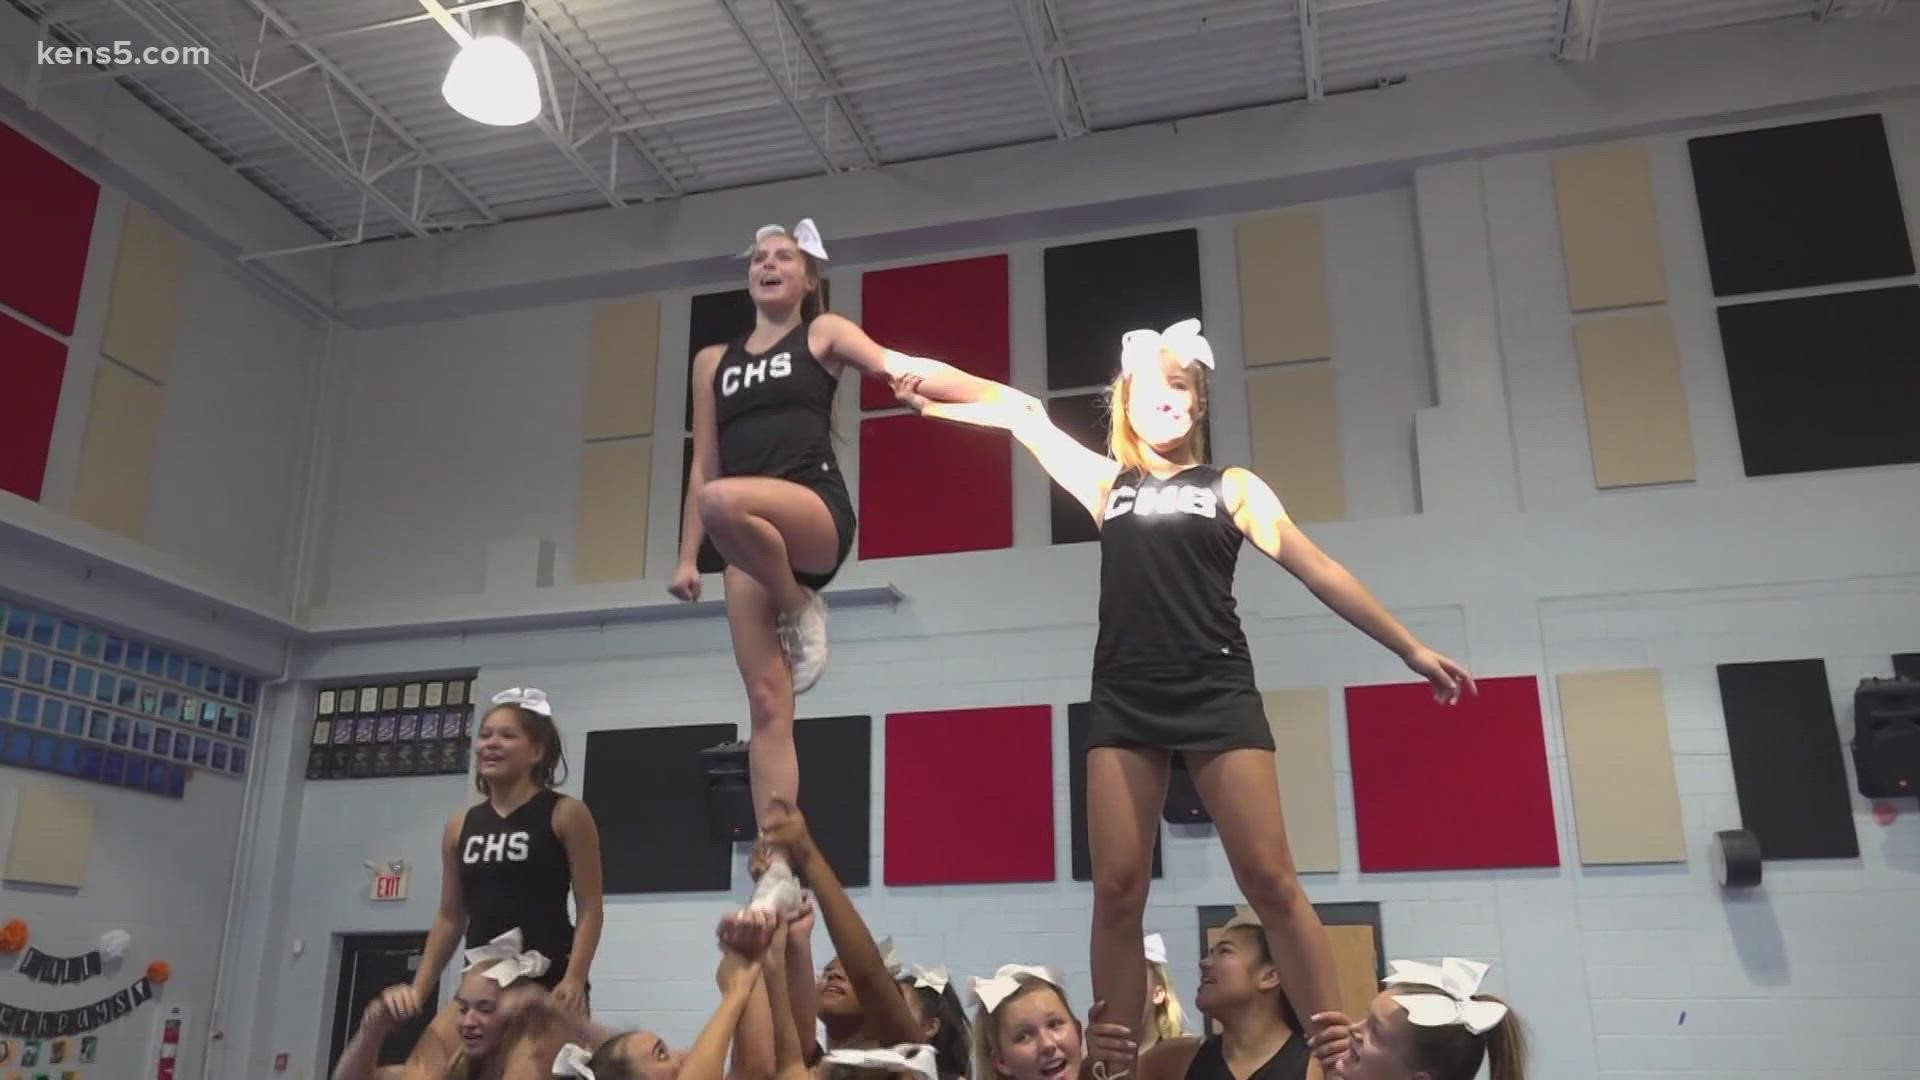 "You don't want a school that's full of negativity," one of the Charger cheerleaders said.